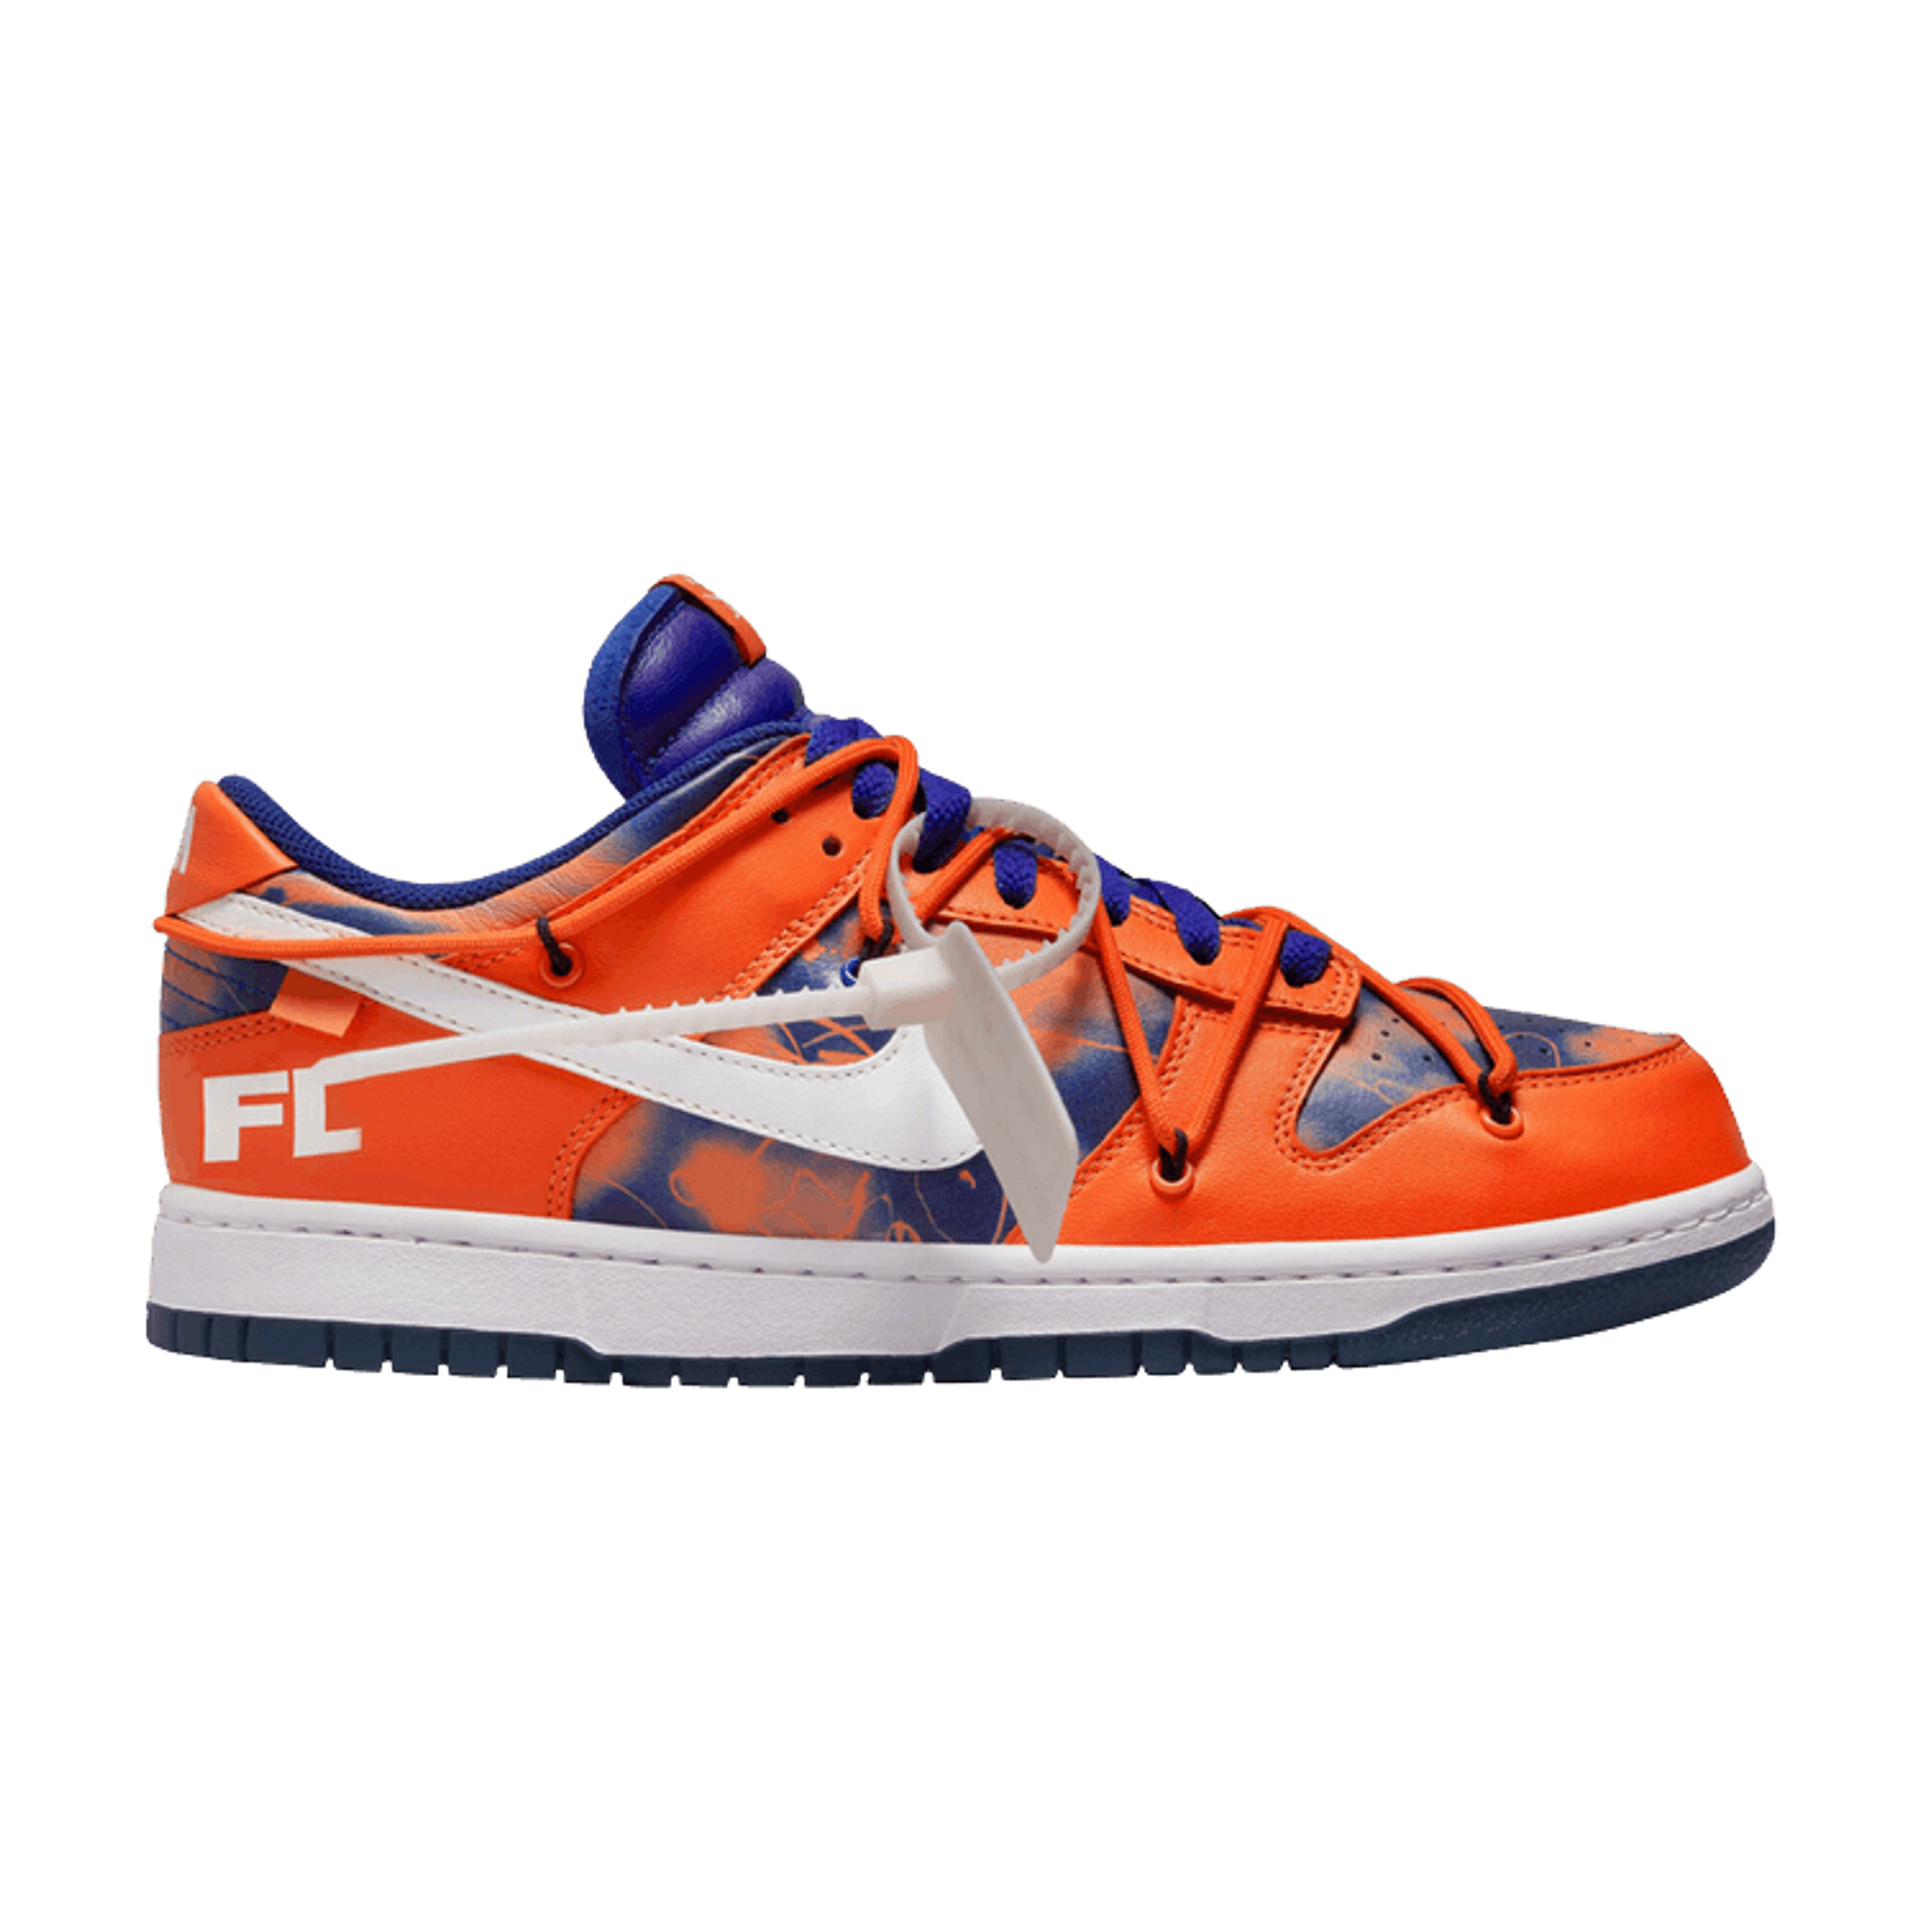 Off-White x Futura x Nike Dunk Low 'New York Mets'